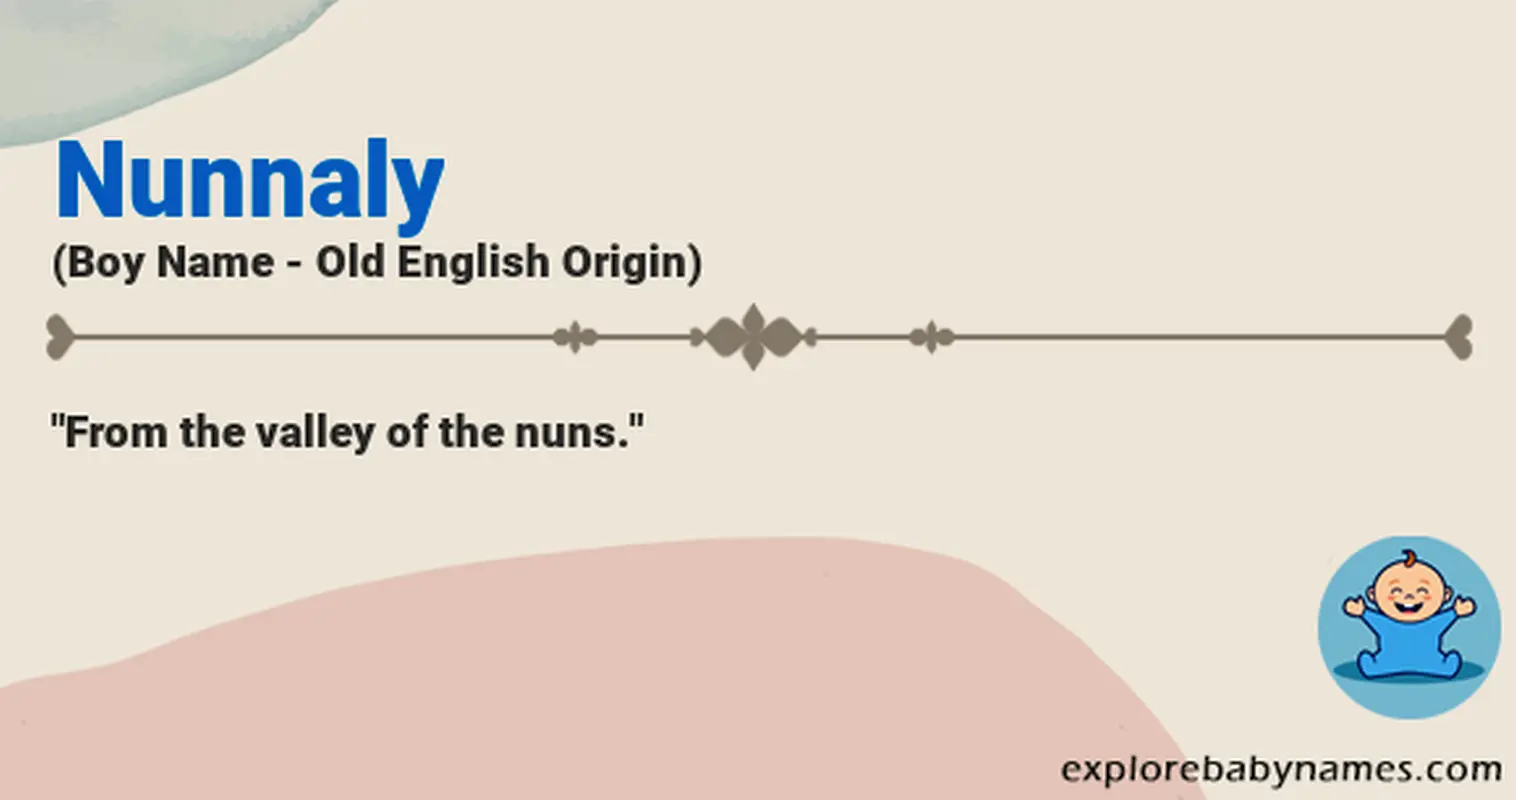 Meaning of Nunnaly